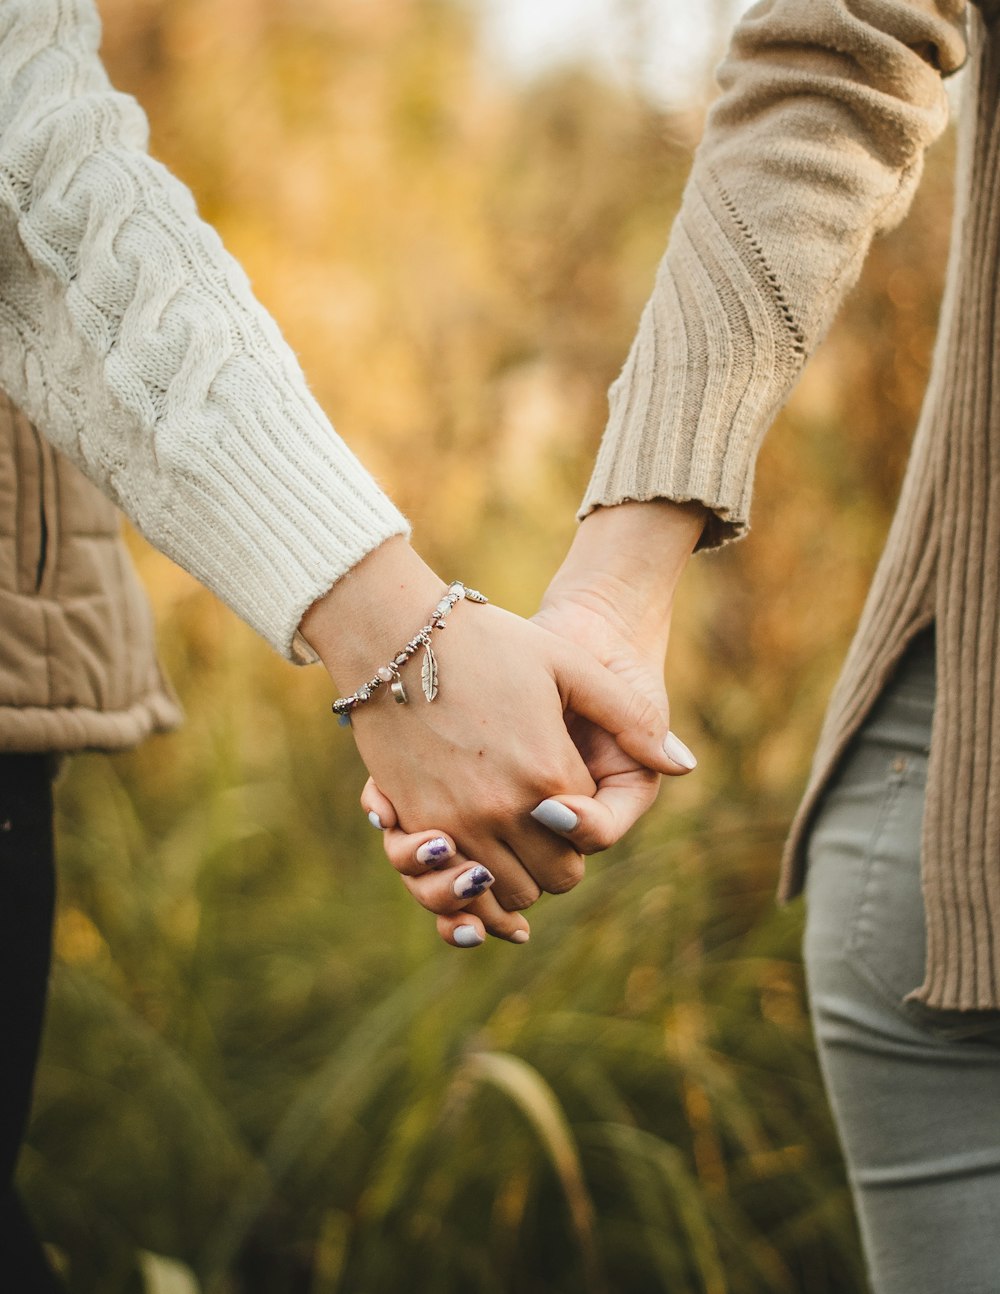 woman in white knit sweater holding hands with man in brown jacket